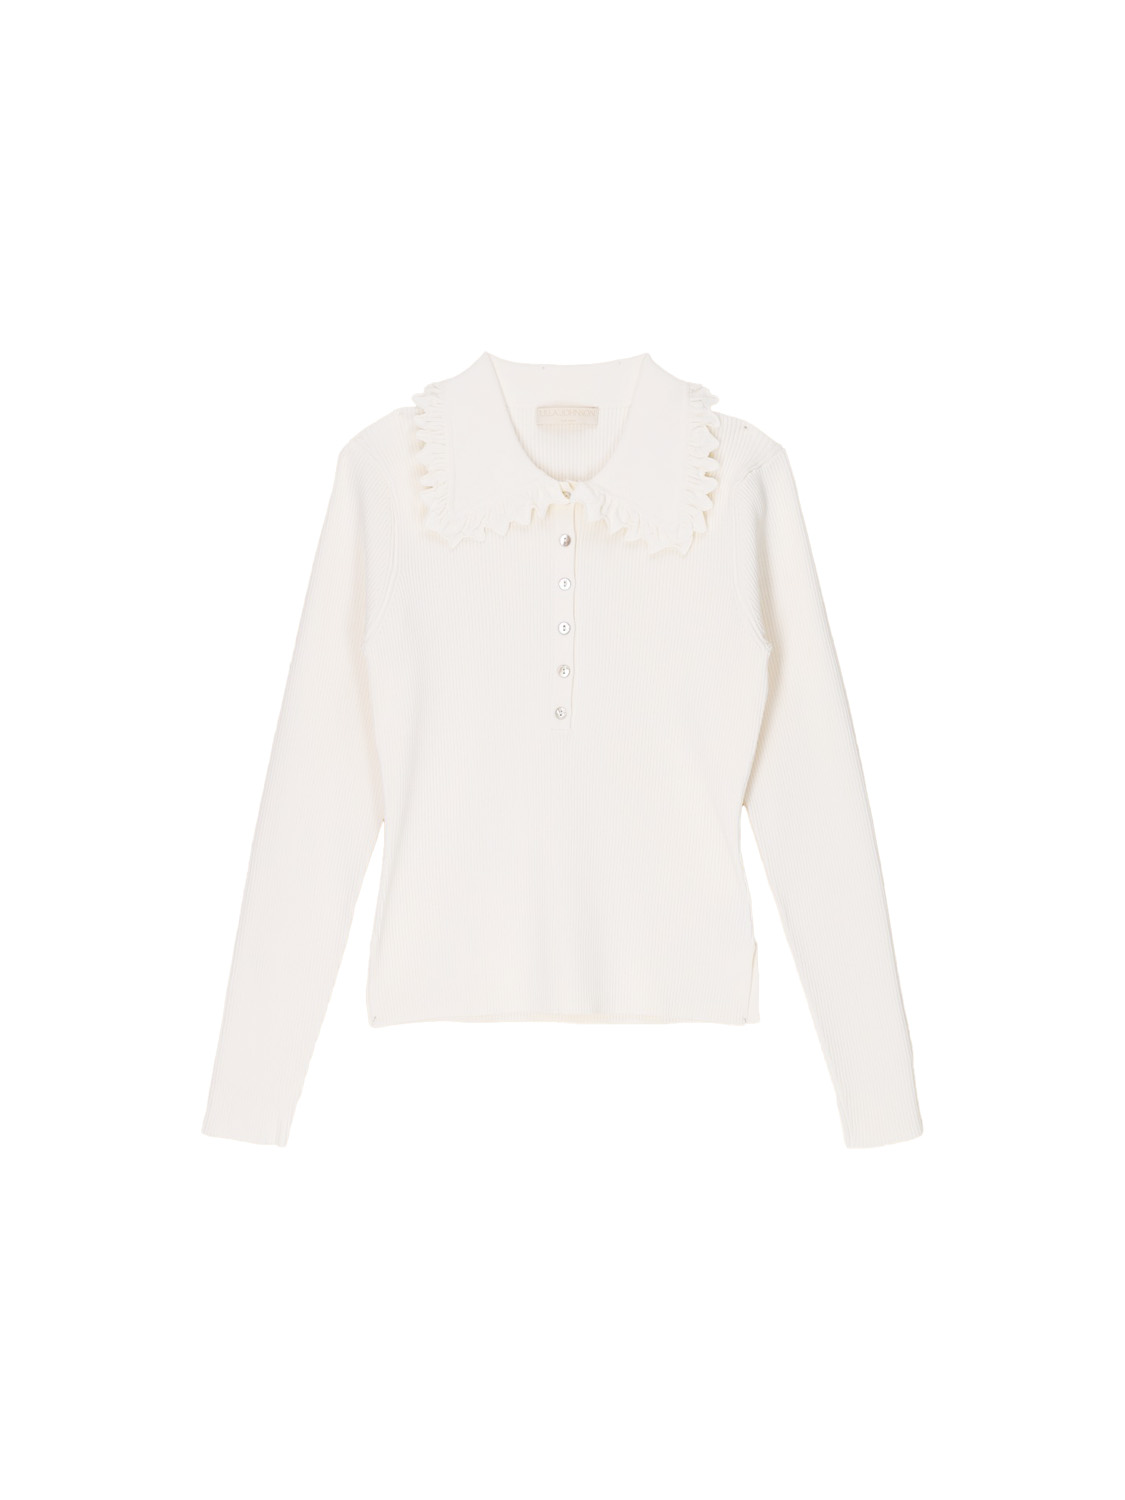 Liese - Longsleeve with frill details 